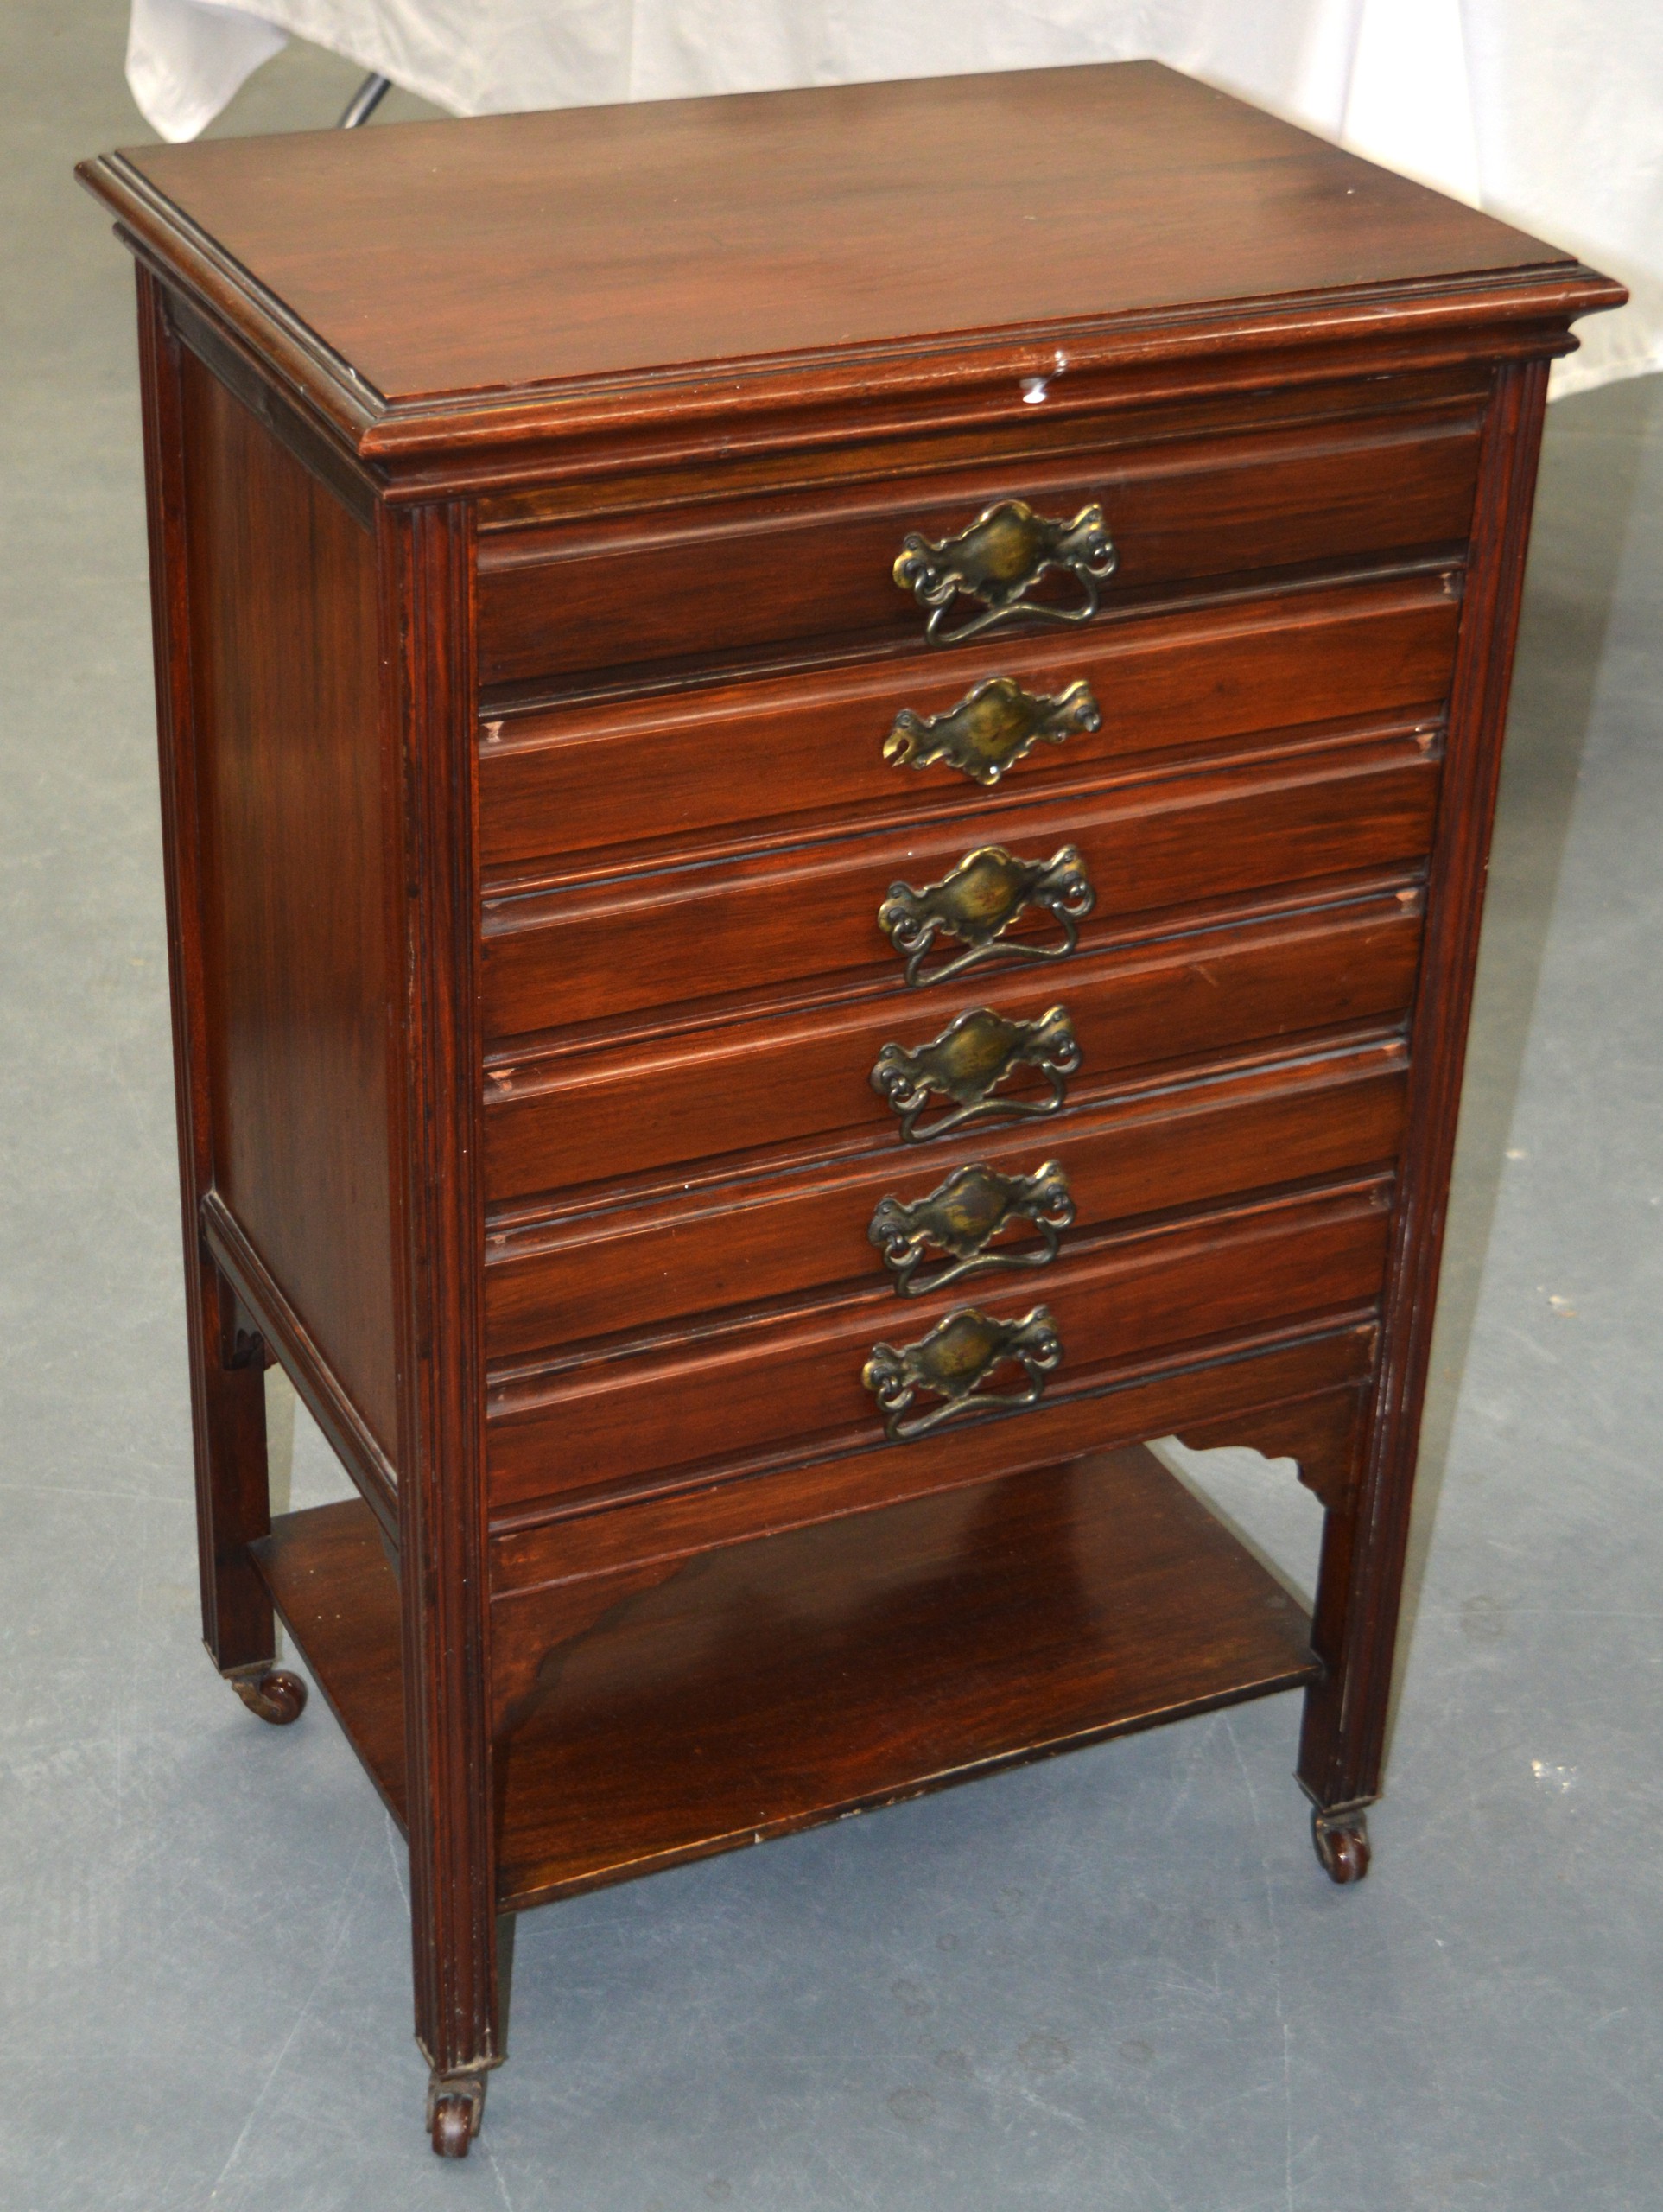 AN EDWARDIAN MAHOGANY MUSIC CABINET. 2Ft 7ins high.